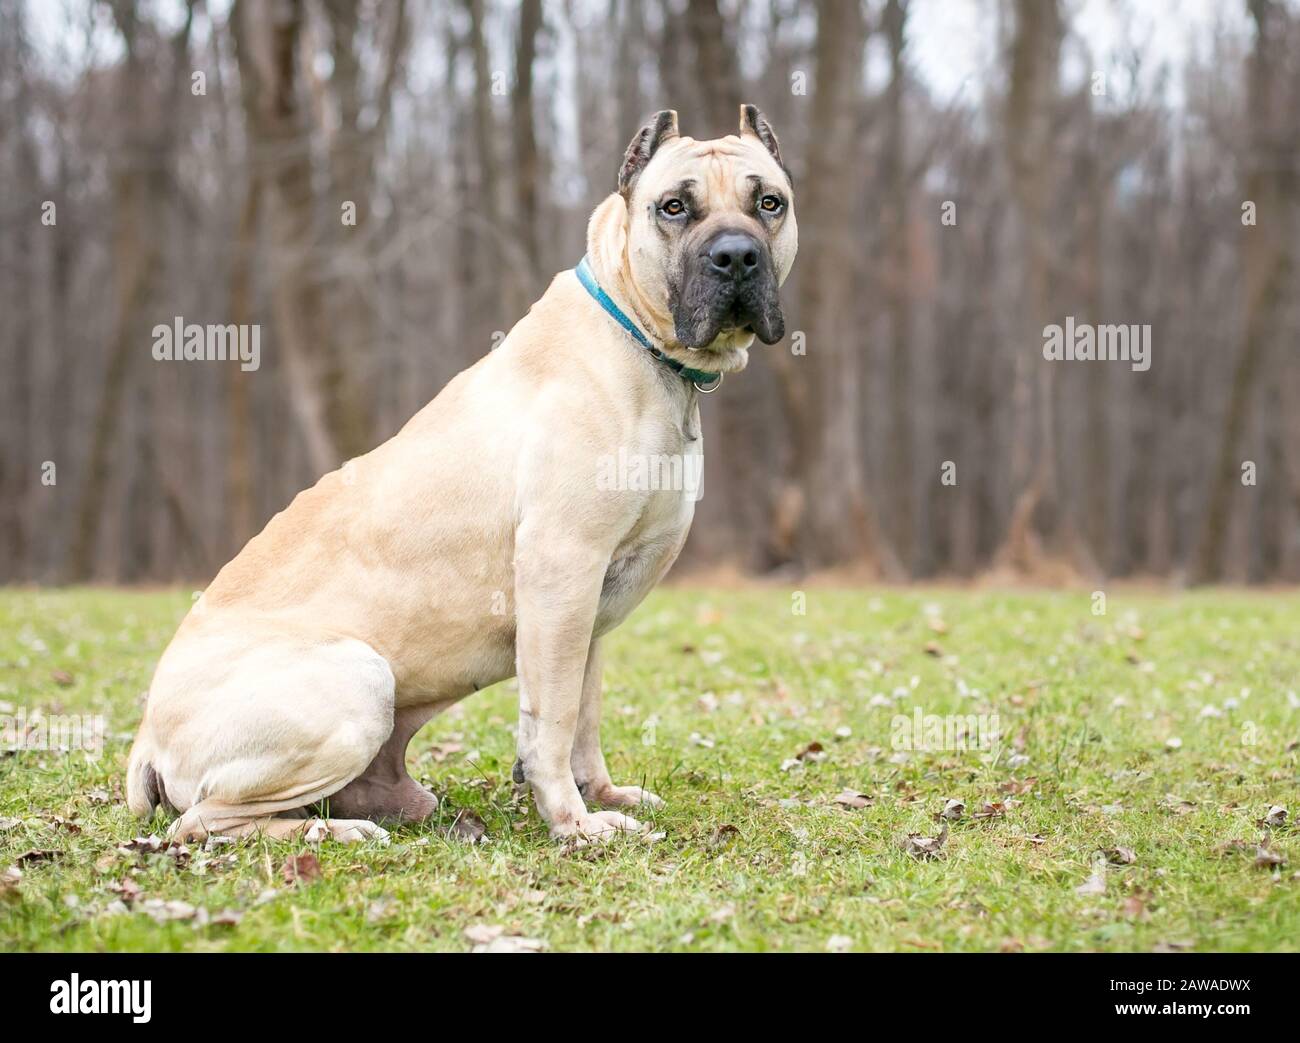 A fawn colored Cane Corso mastiff dog with cropped ears sitting outdoors Stock Photo